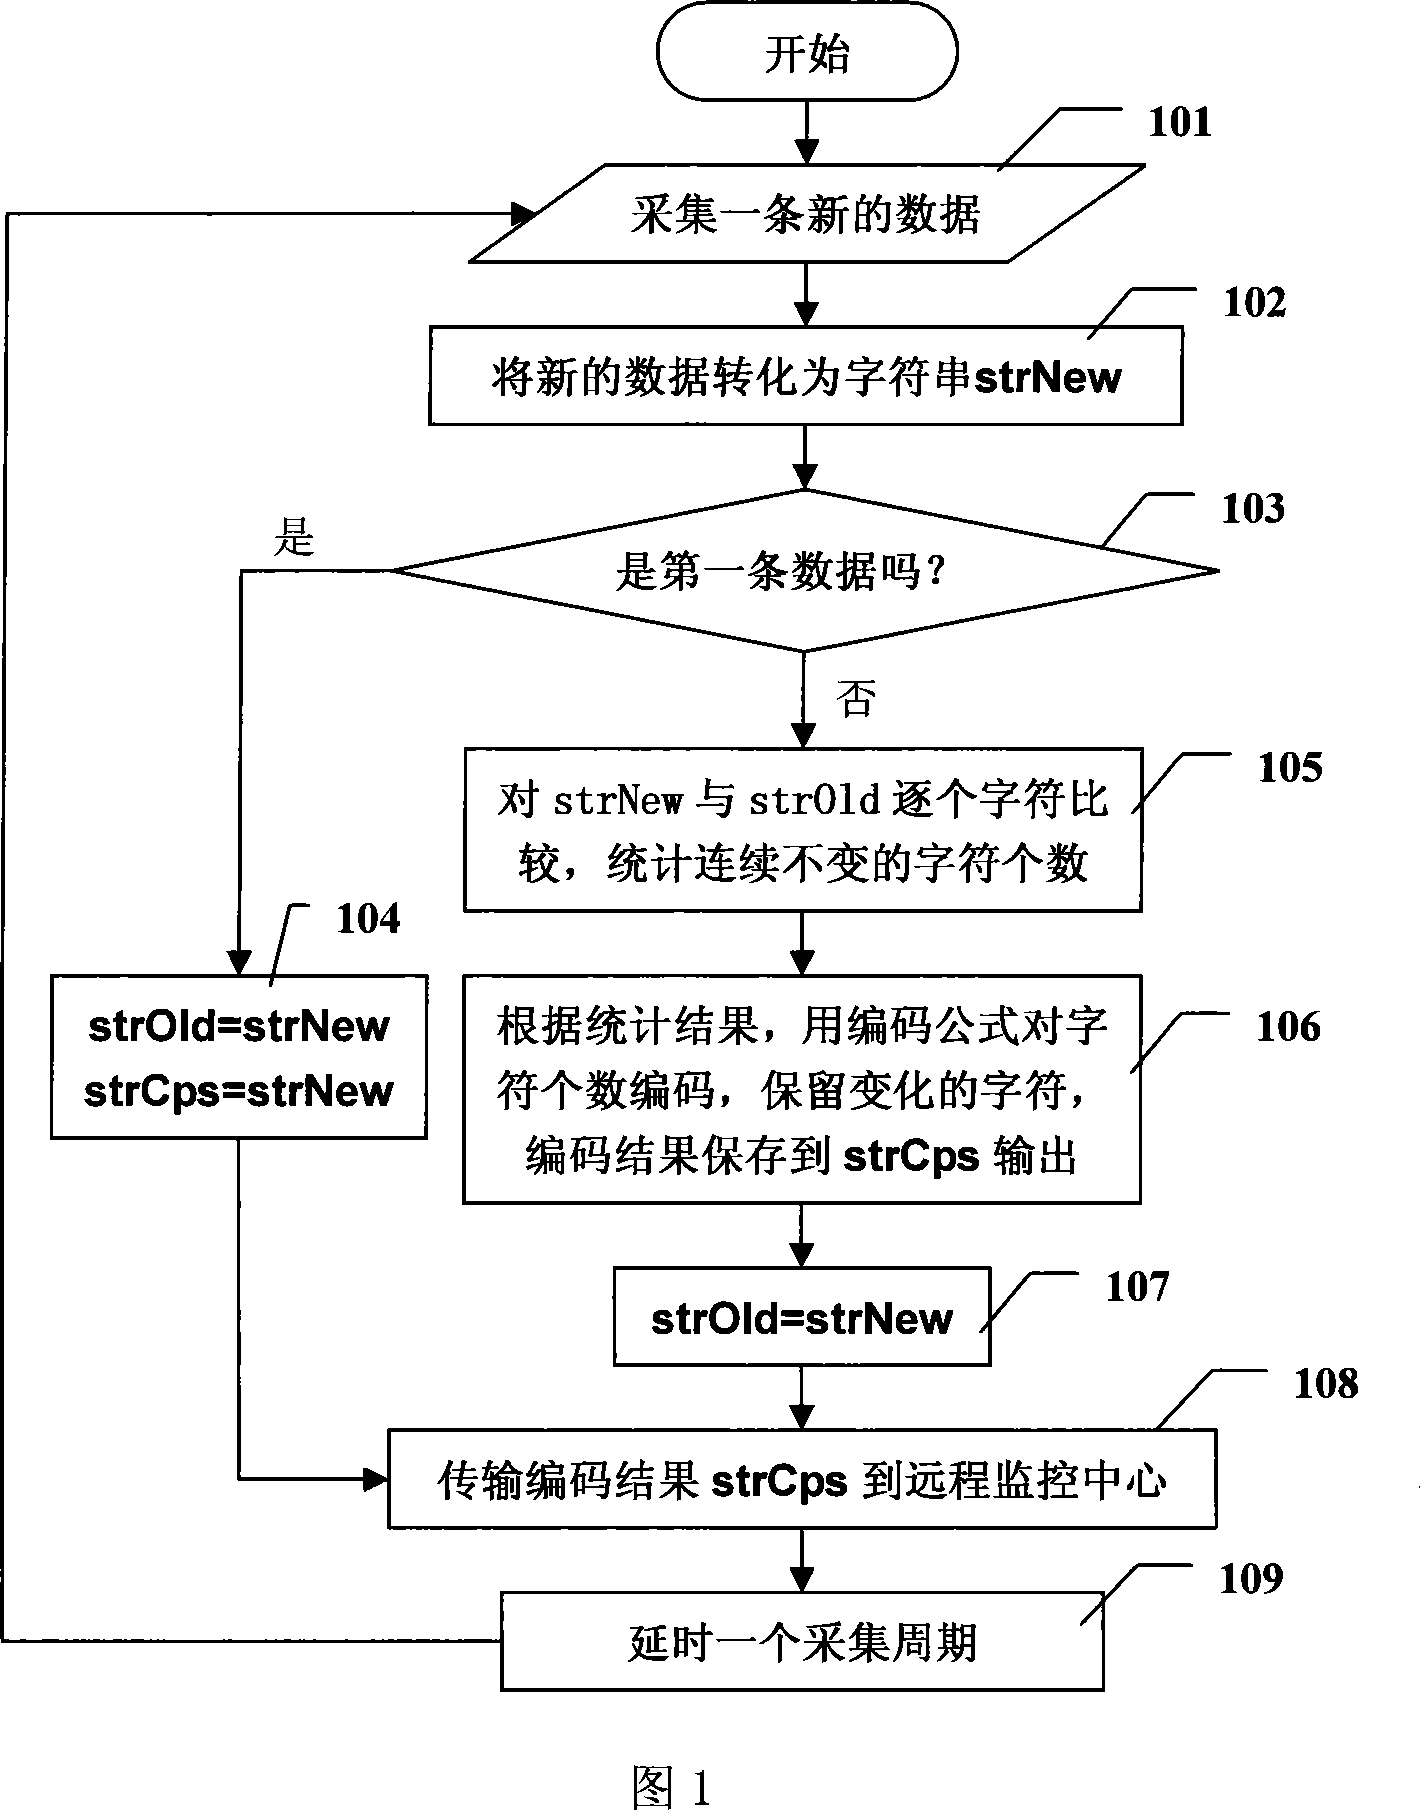 Data lossless compression method for data transmission of remote monitoring system